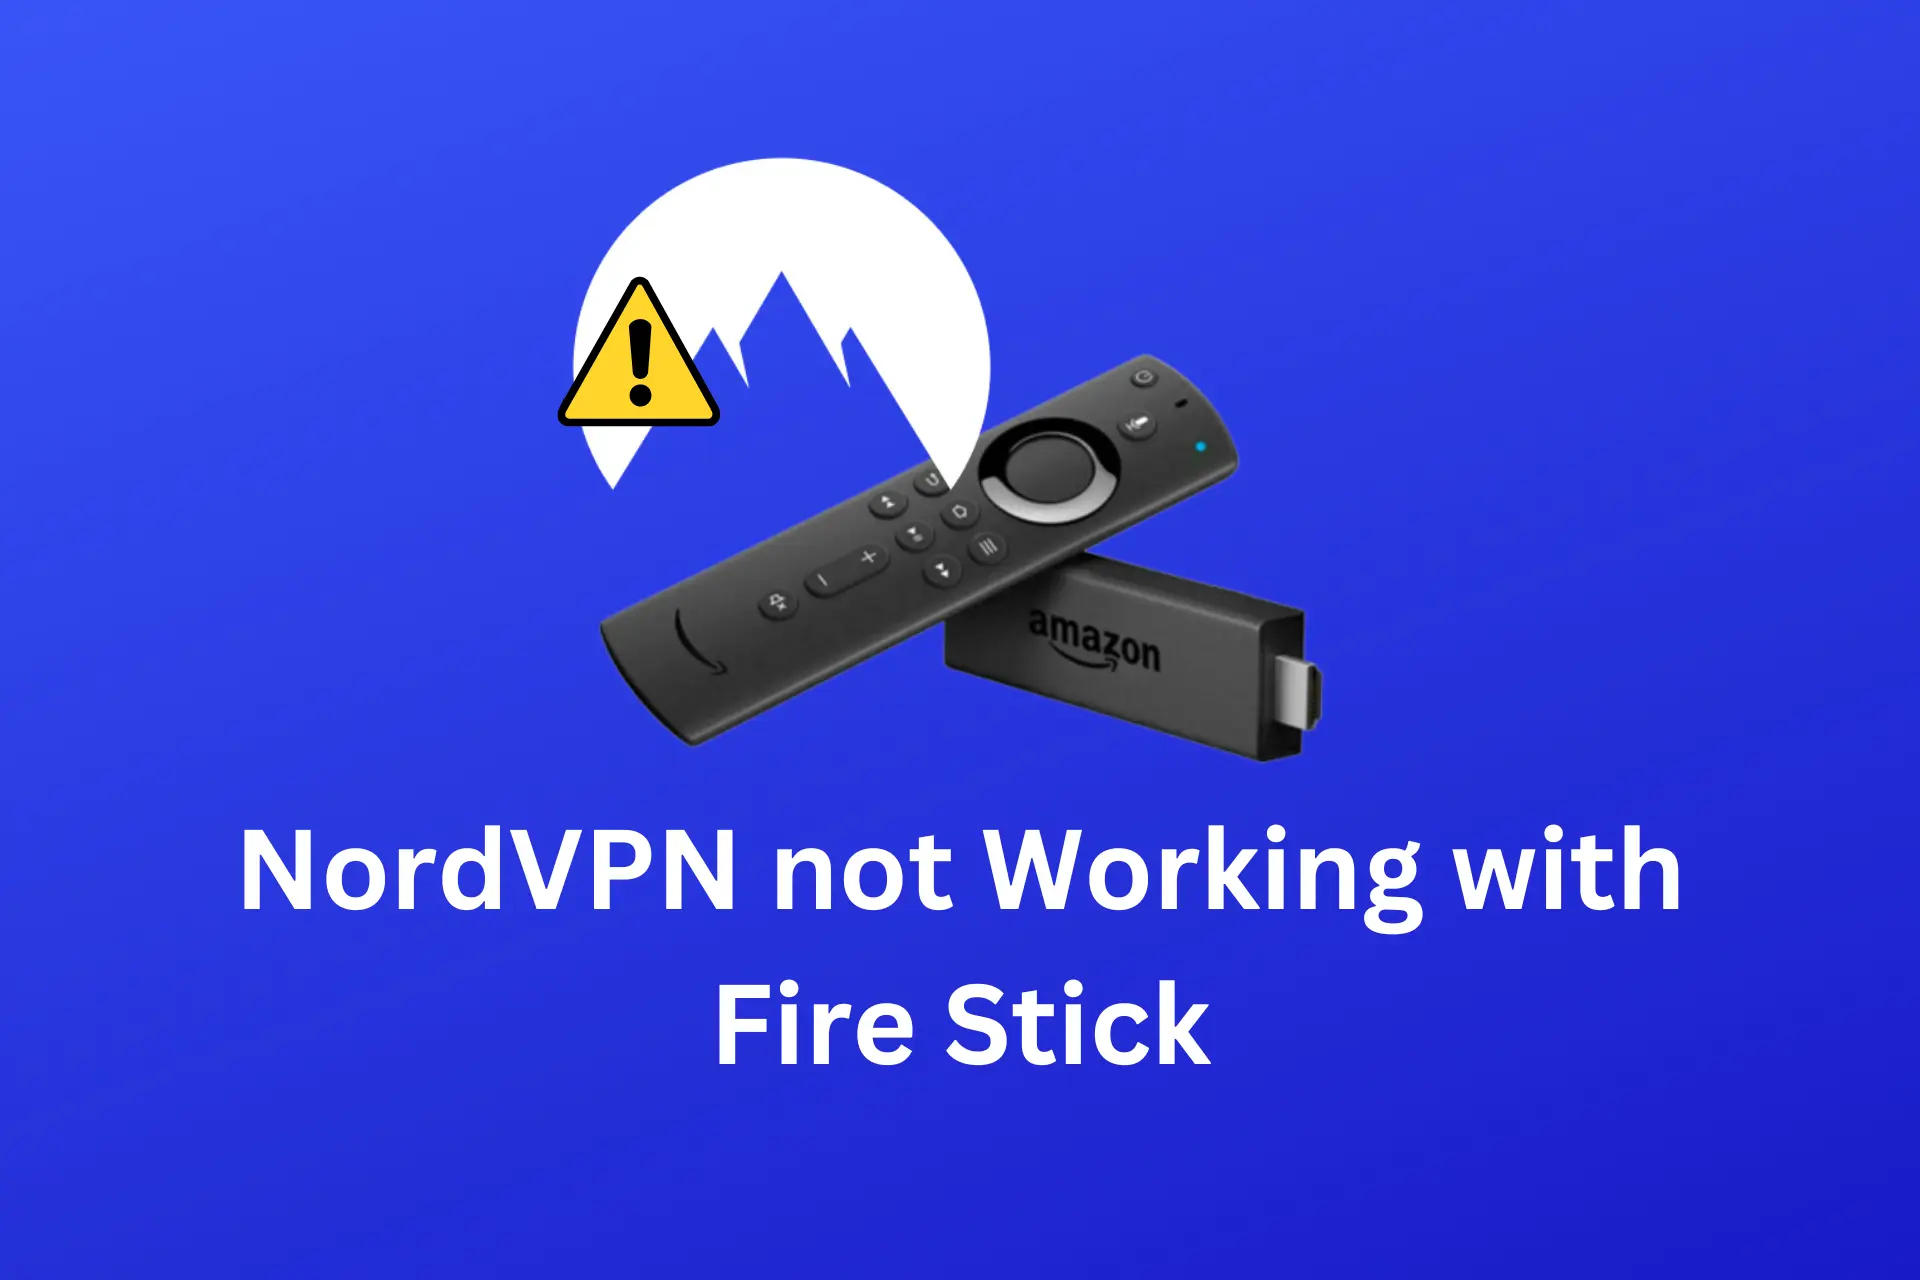 nordvpn not working with fire stick